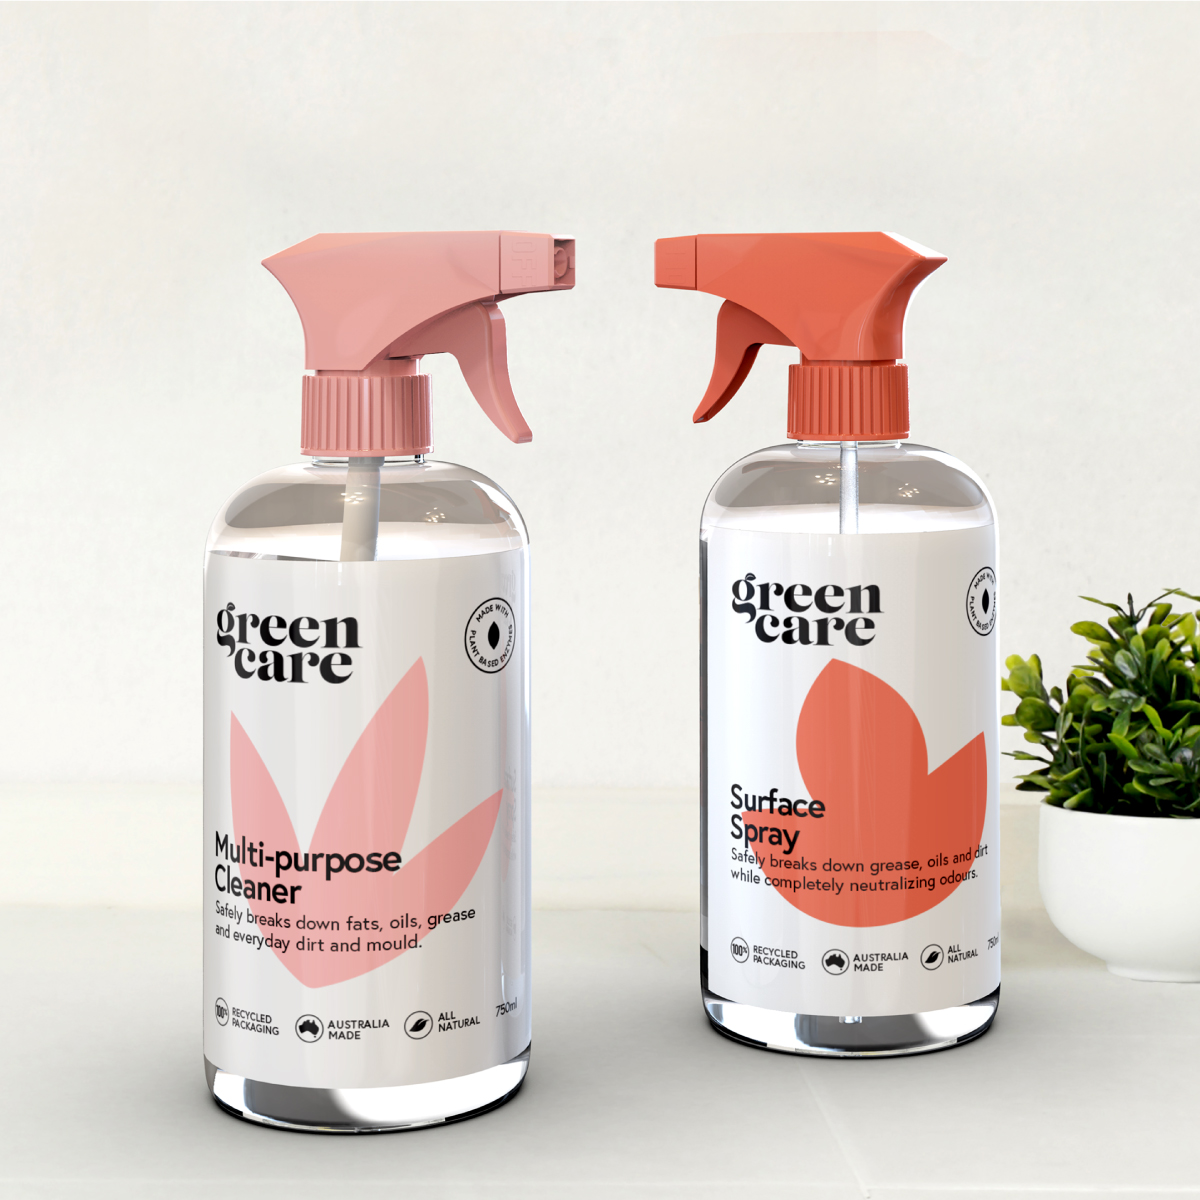 Green Care - product range packaging design